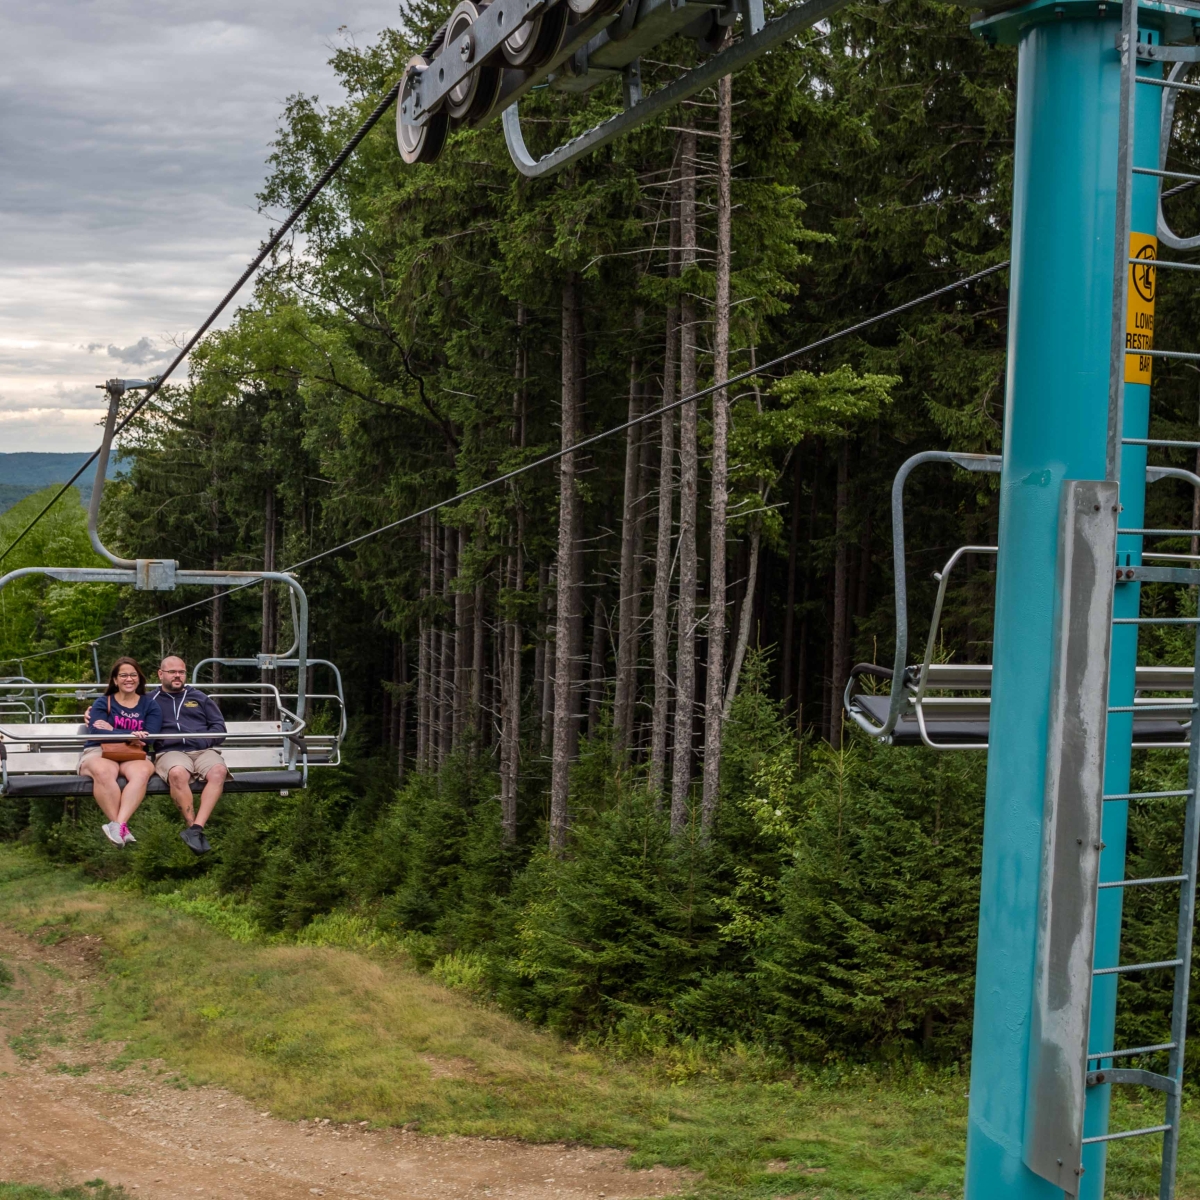 Couple on a Summer Chairlift ride on Spruce lift at Holiday Valley Resort